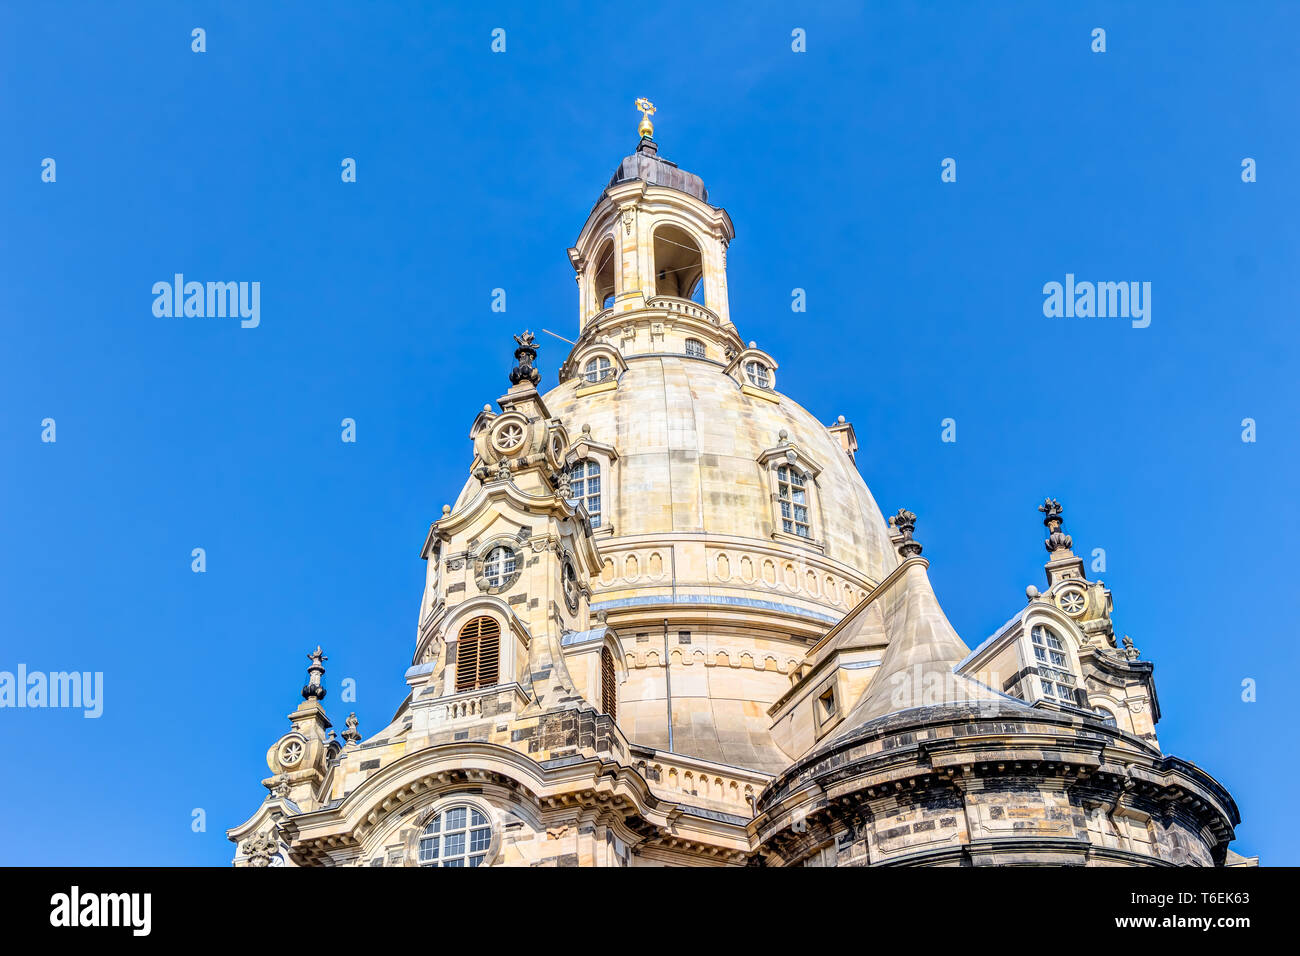 The famous Church of Our Lady, Dresden, Germany Stock Photo